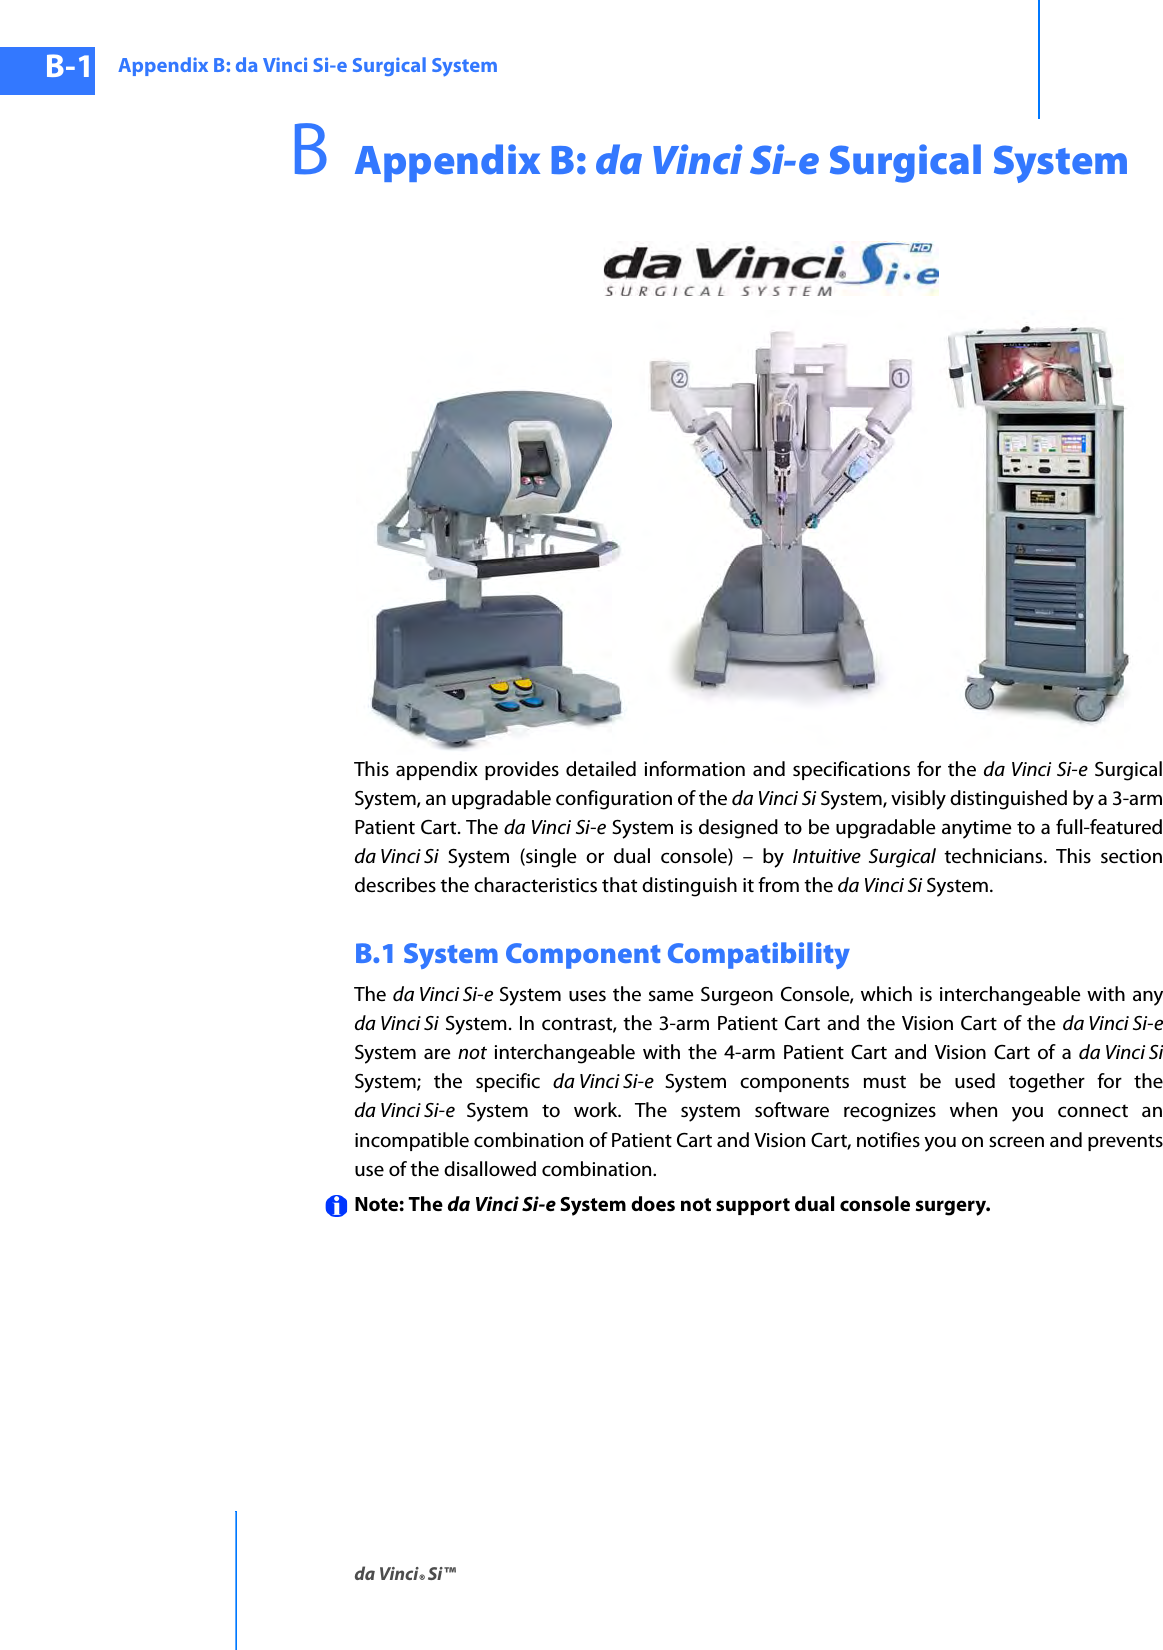 Appendix B: da Vinci Si-e Surgical Systemda Vinci® Si™B-1DRAFT/PRE-RELEASE/CONFIDENTIAL10/9/14BAppendix B: da Vinci Si-e Surgical SystemThis appendix provides detailed information and specifications for the da Vinci Si-e Surgical System, an upgradable configuration of the da Vinci Si System, visibly distinguished by a 3-arm Patient Cart. The da Vinci Si-e System is designed to be upgradable anytime to a full-featured da Vinci Si System (single or dual console) – by Intuitive Surgical technicians. This section describes the characteristics that distinguish it from the da Vinci Si System.B.1 System Component CompatibilityThe  da Vinci Si-e System uses the same Surgeon Console, which is interchangeable with any da Vinci Si System. In contrast, the 3-arm Patient Cart and the Vision Cart of the da Vinci Si-e System are not interchangeable with the 4-arm Patient Cart and Vision Cart of a da Vinci SiSystem; the specific da Vinci Si-e  System components must be used together for the da Vinci Si-e  System to work. The system software recognizes when you connect an incompatible combination of Patient Cart and Vision Cart, notifies you on screen and prevents use of the disallowed combination. Note: The da Vinci Si-e System does not support dual console surgery.